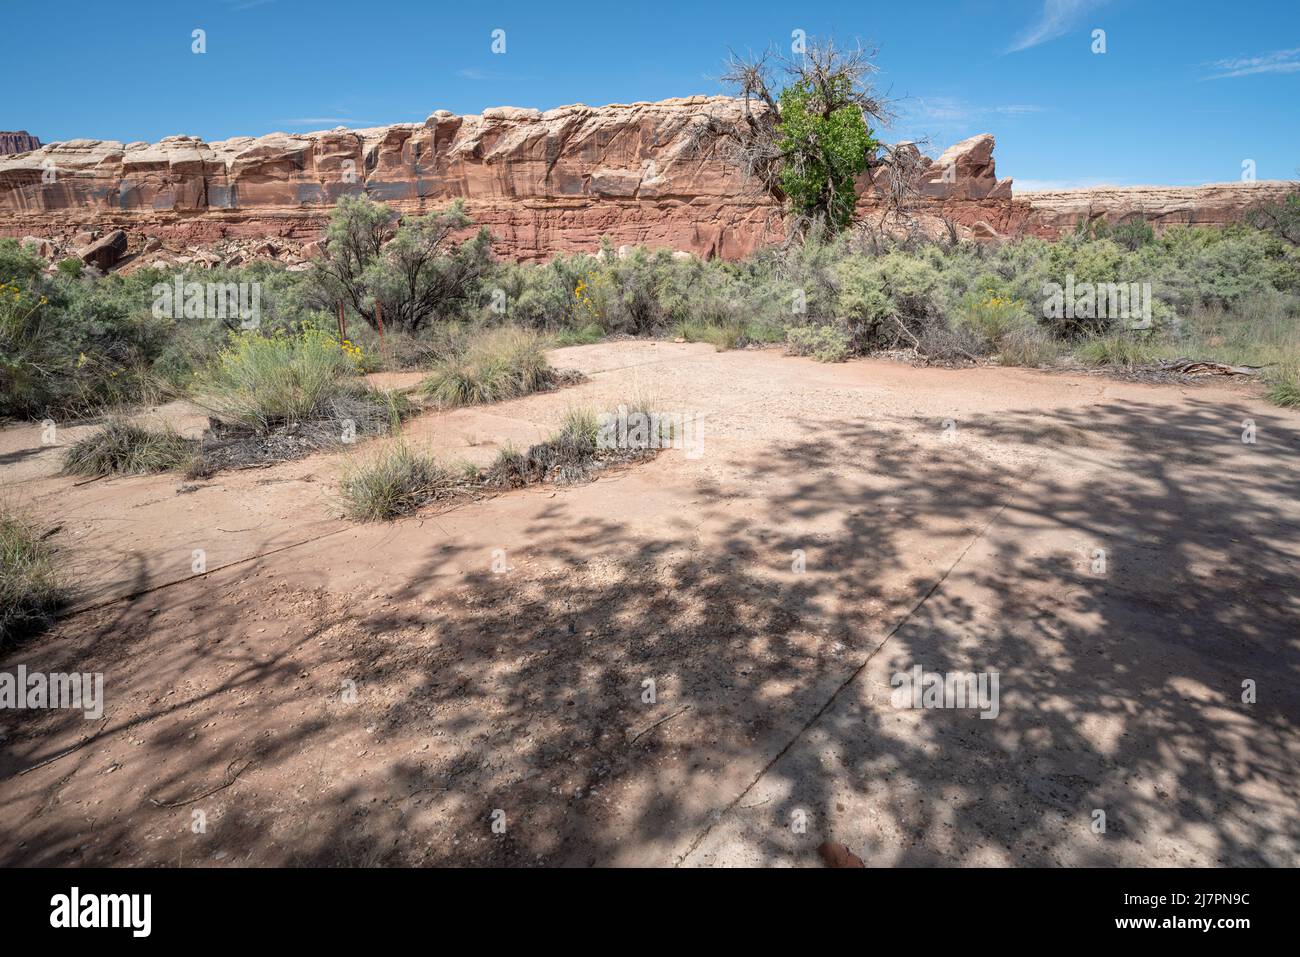 Remains of the Friendship Cruise dance floor at Anderson Bottom, Canyonlands National Park, Utah. Stock Photo